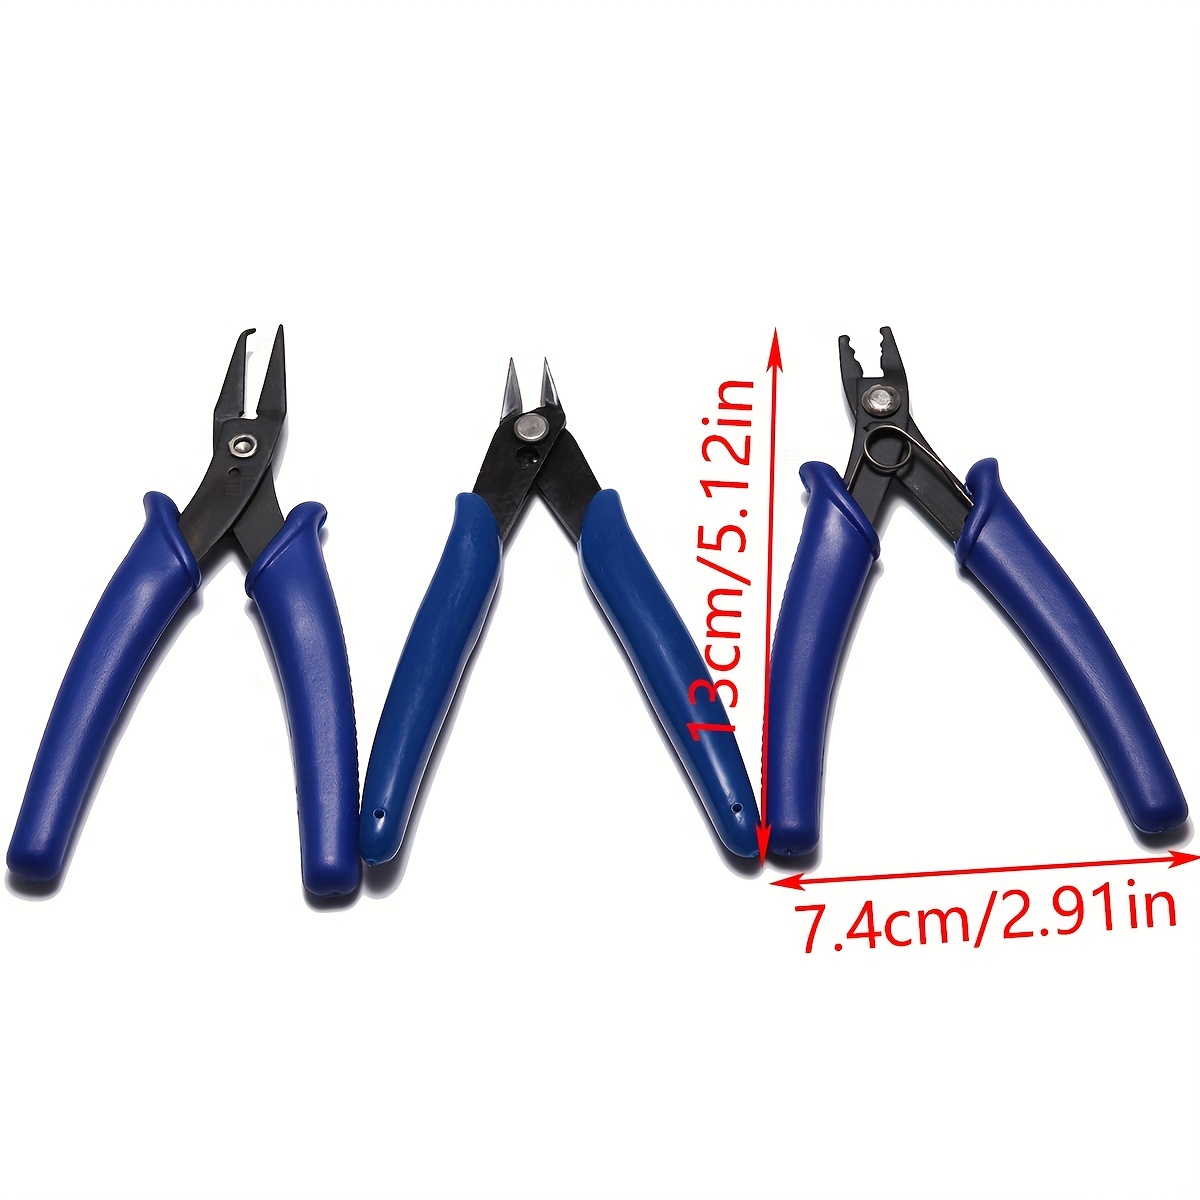  Jewelry Beading Crimper Pliers Bead Crimping Tool 13cm Blue :  Arts, Crafts & Sewing